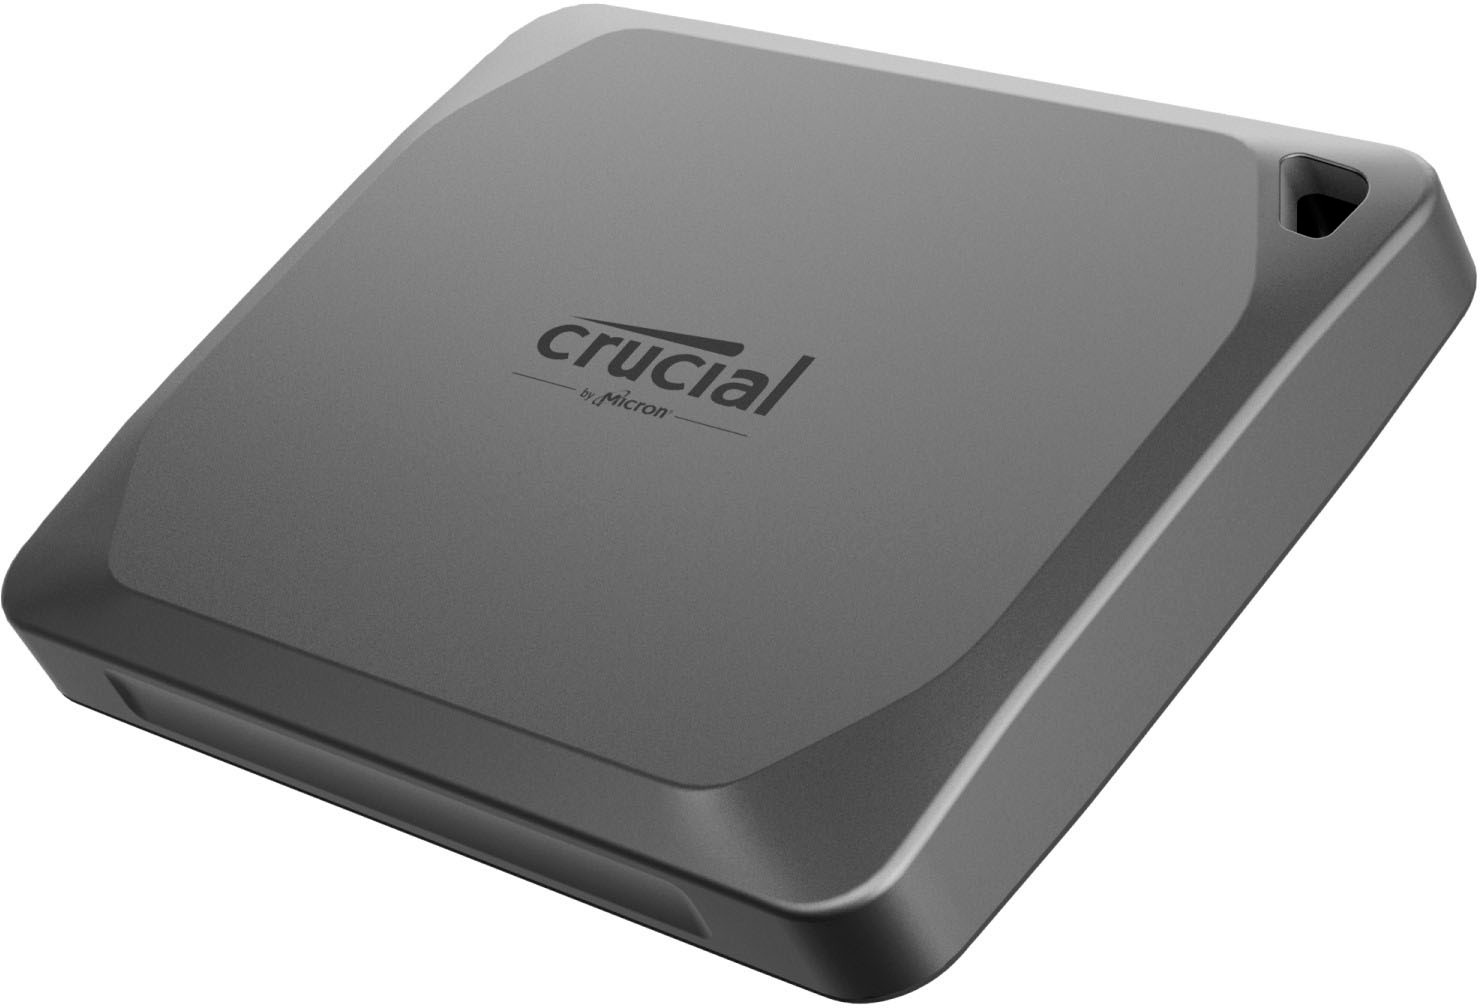 Crucial X9 And X10 Pro Review: The Best Fast External Flash Drives?